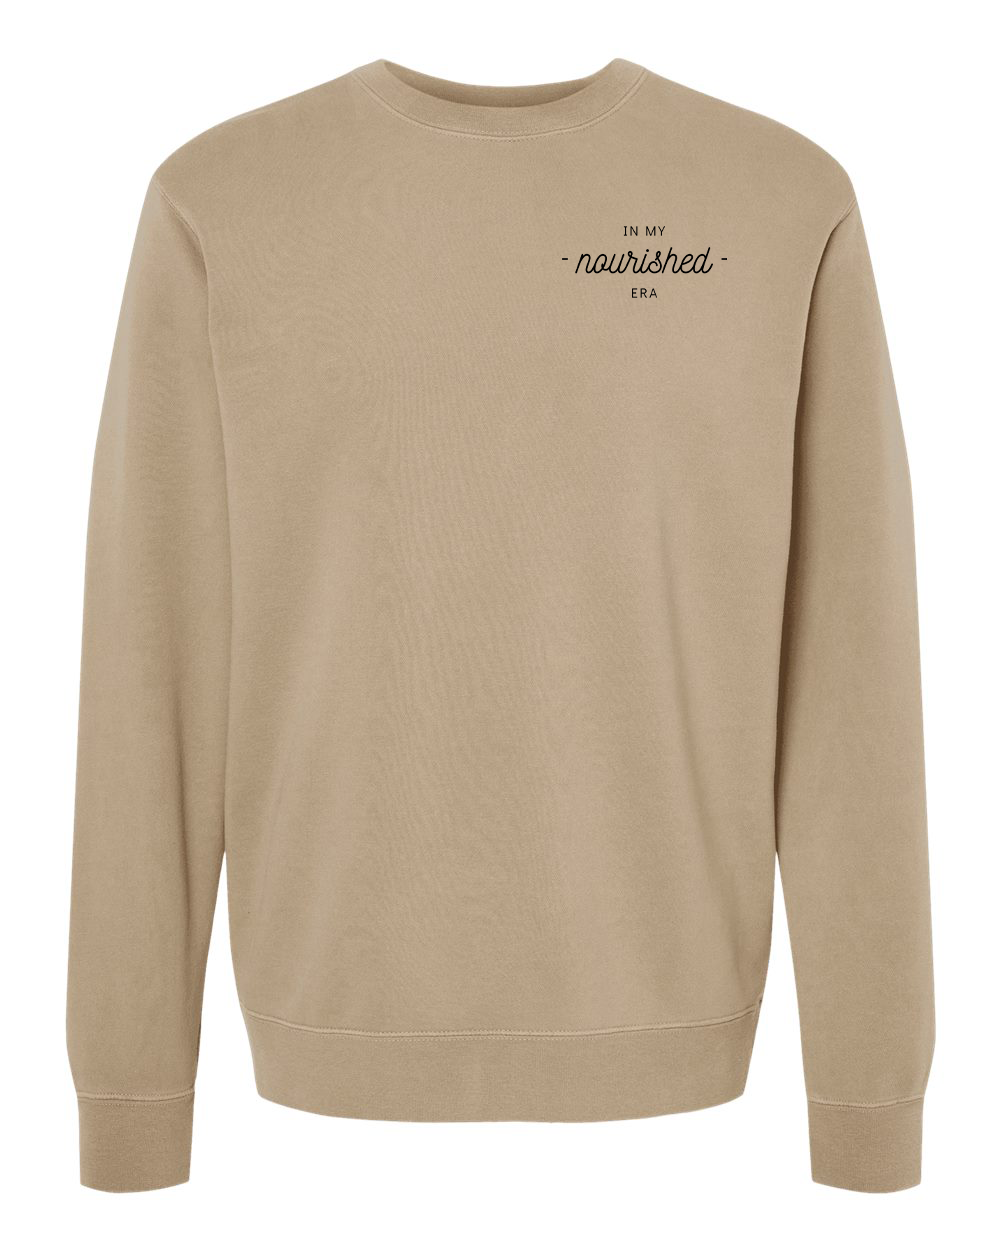 custom design of Independent Trading Co. PRM3500 - Unisex Midweight Pigment Dyed Crew Neck